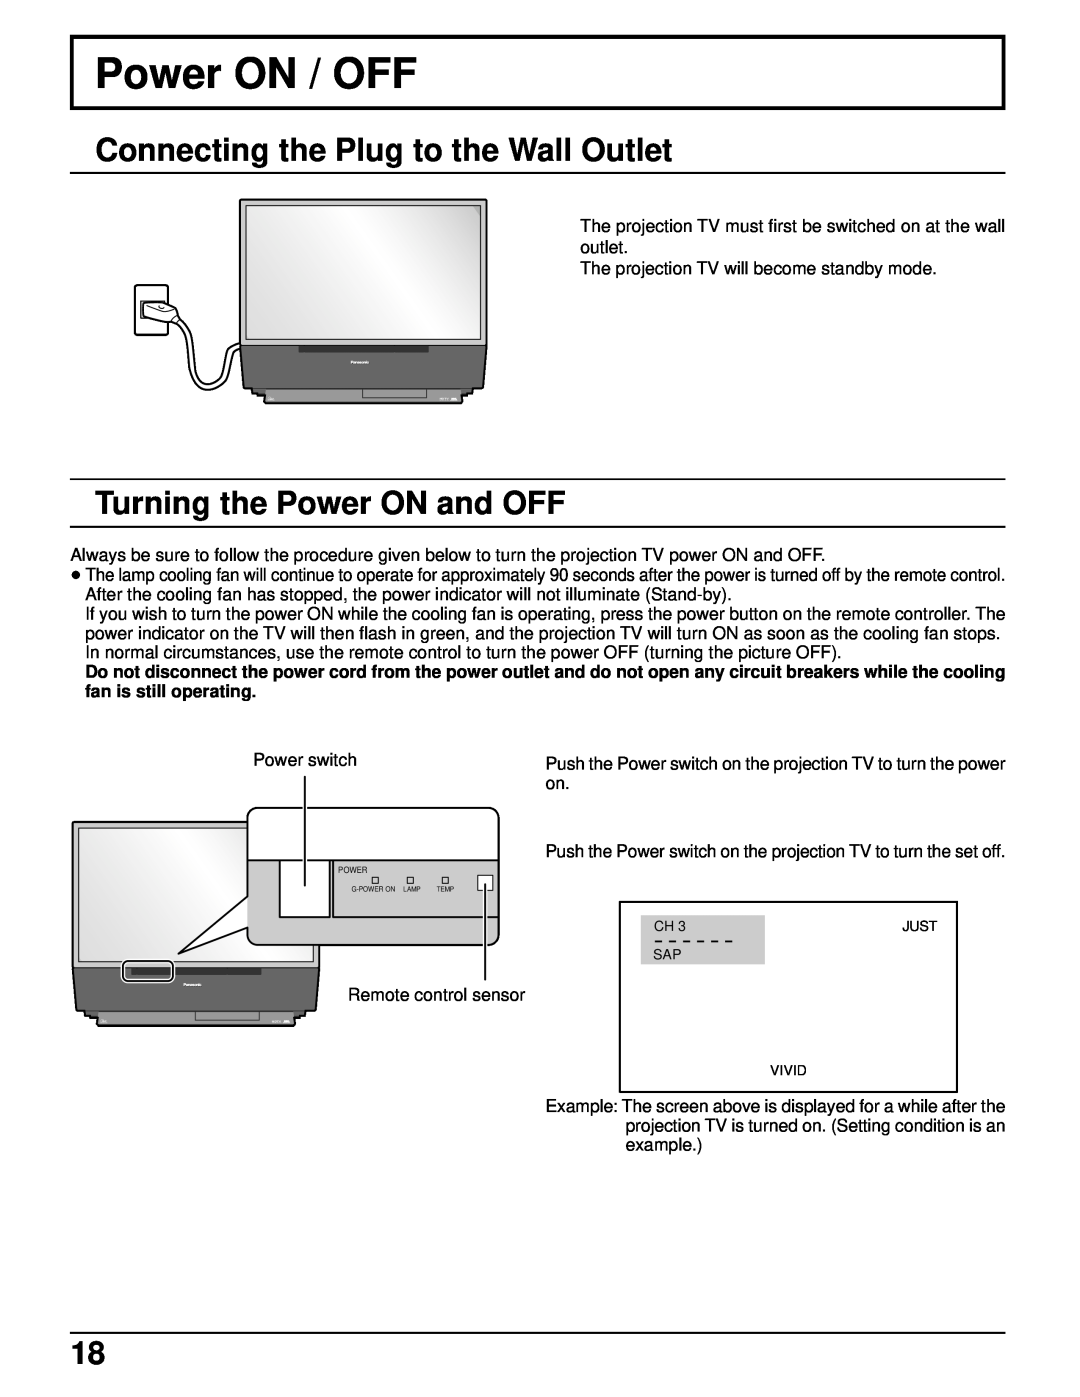 Panasonic PT 52DL52 manual Power ON / OFF, Connecting the Plug to the Wall Outlet, Turning the Power ON and OFF 